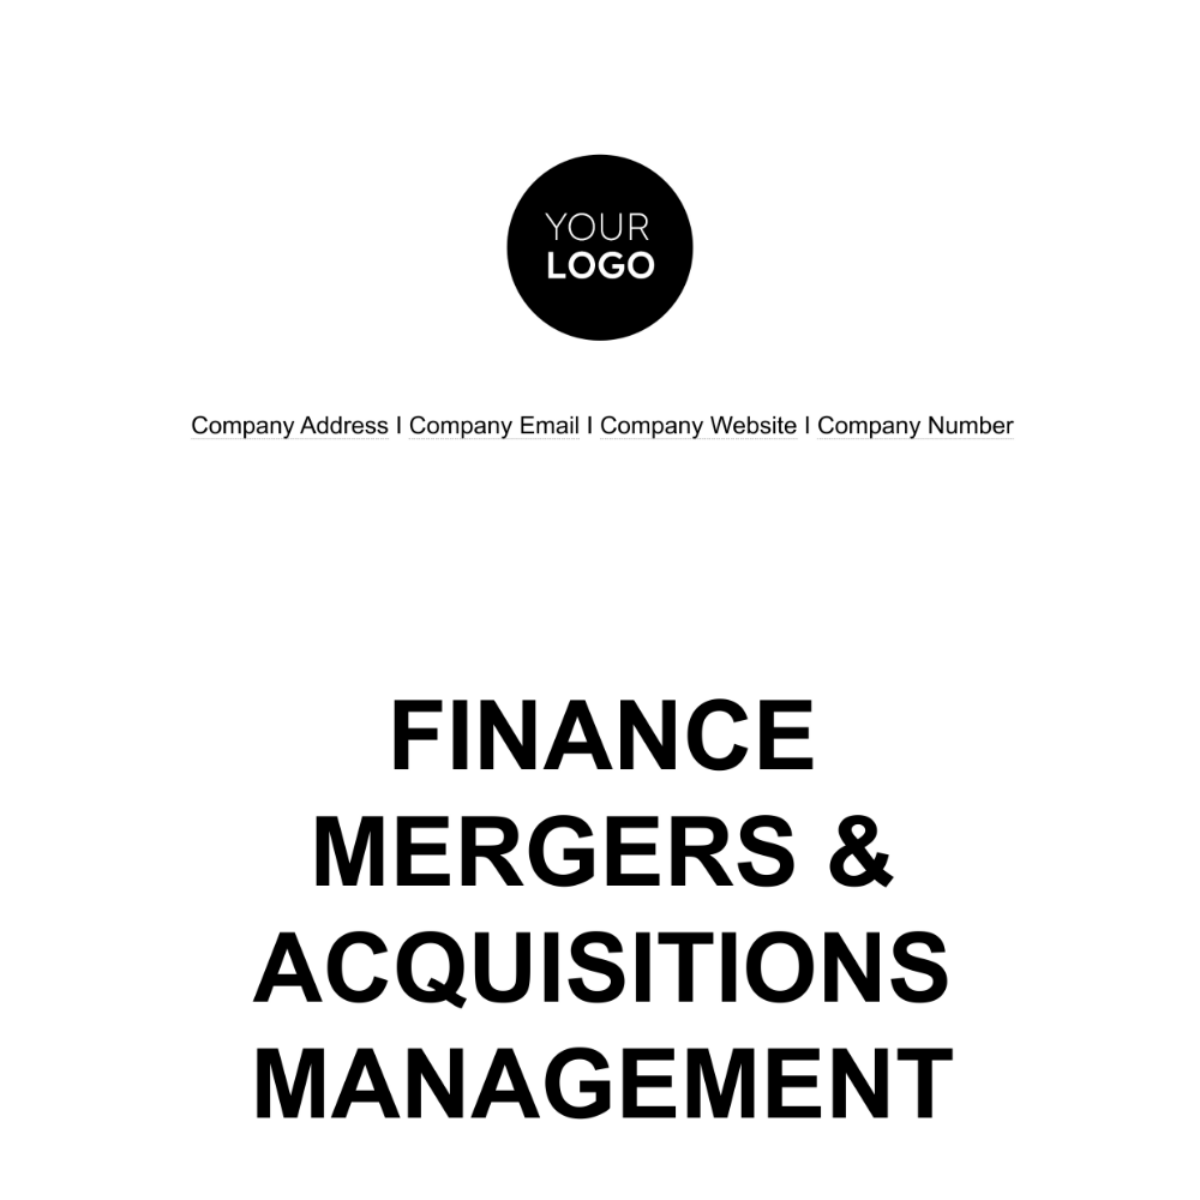 Free Finance Mergers & Acquisitions Management Template